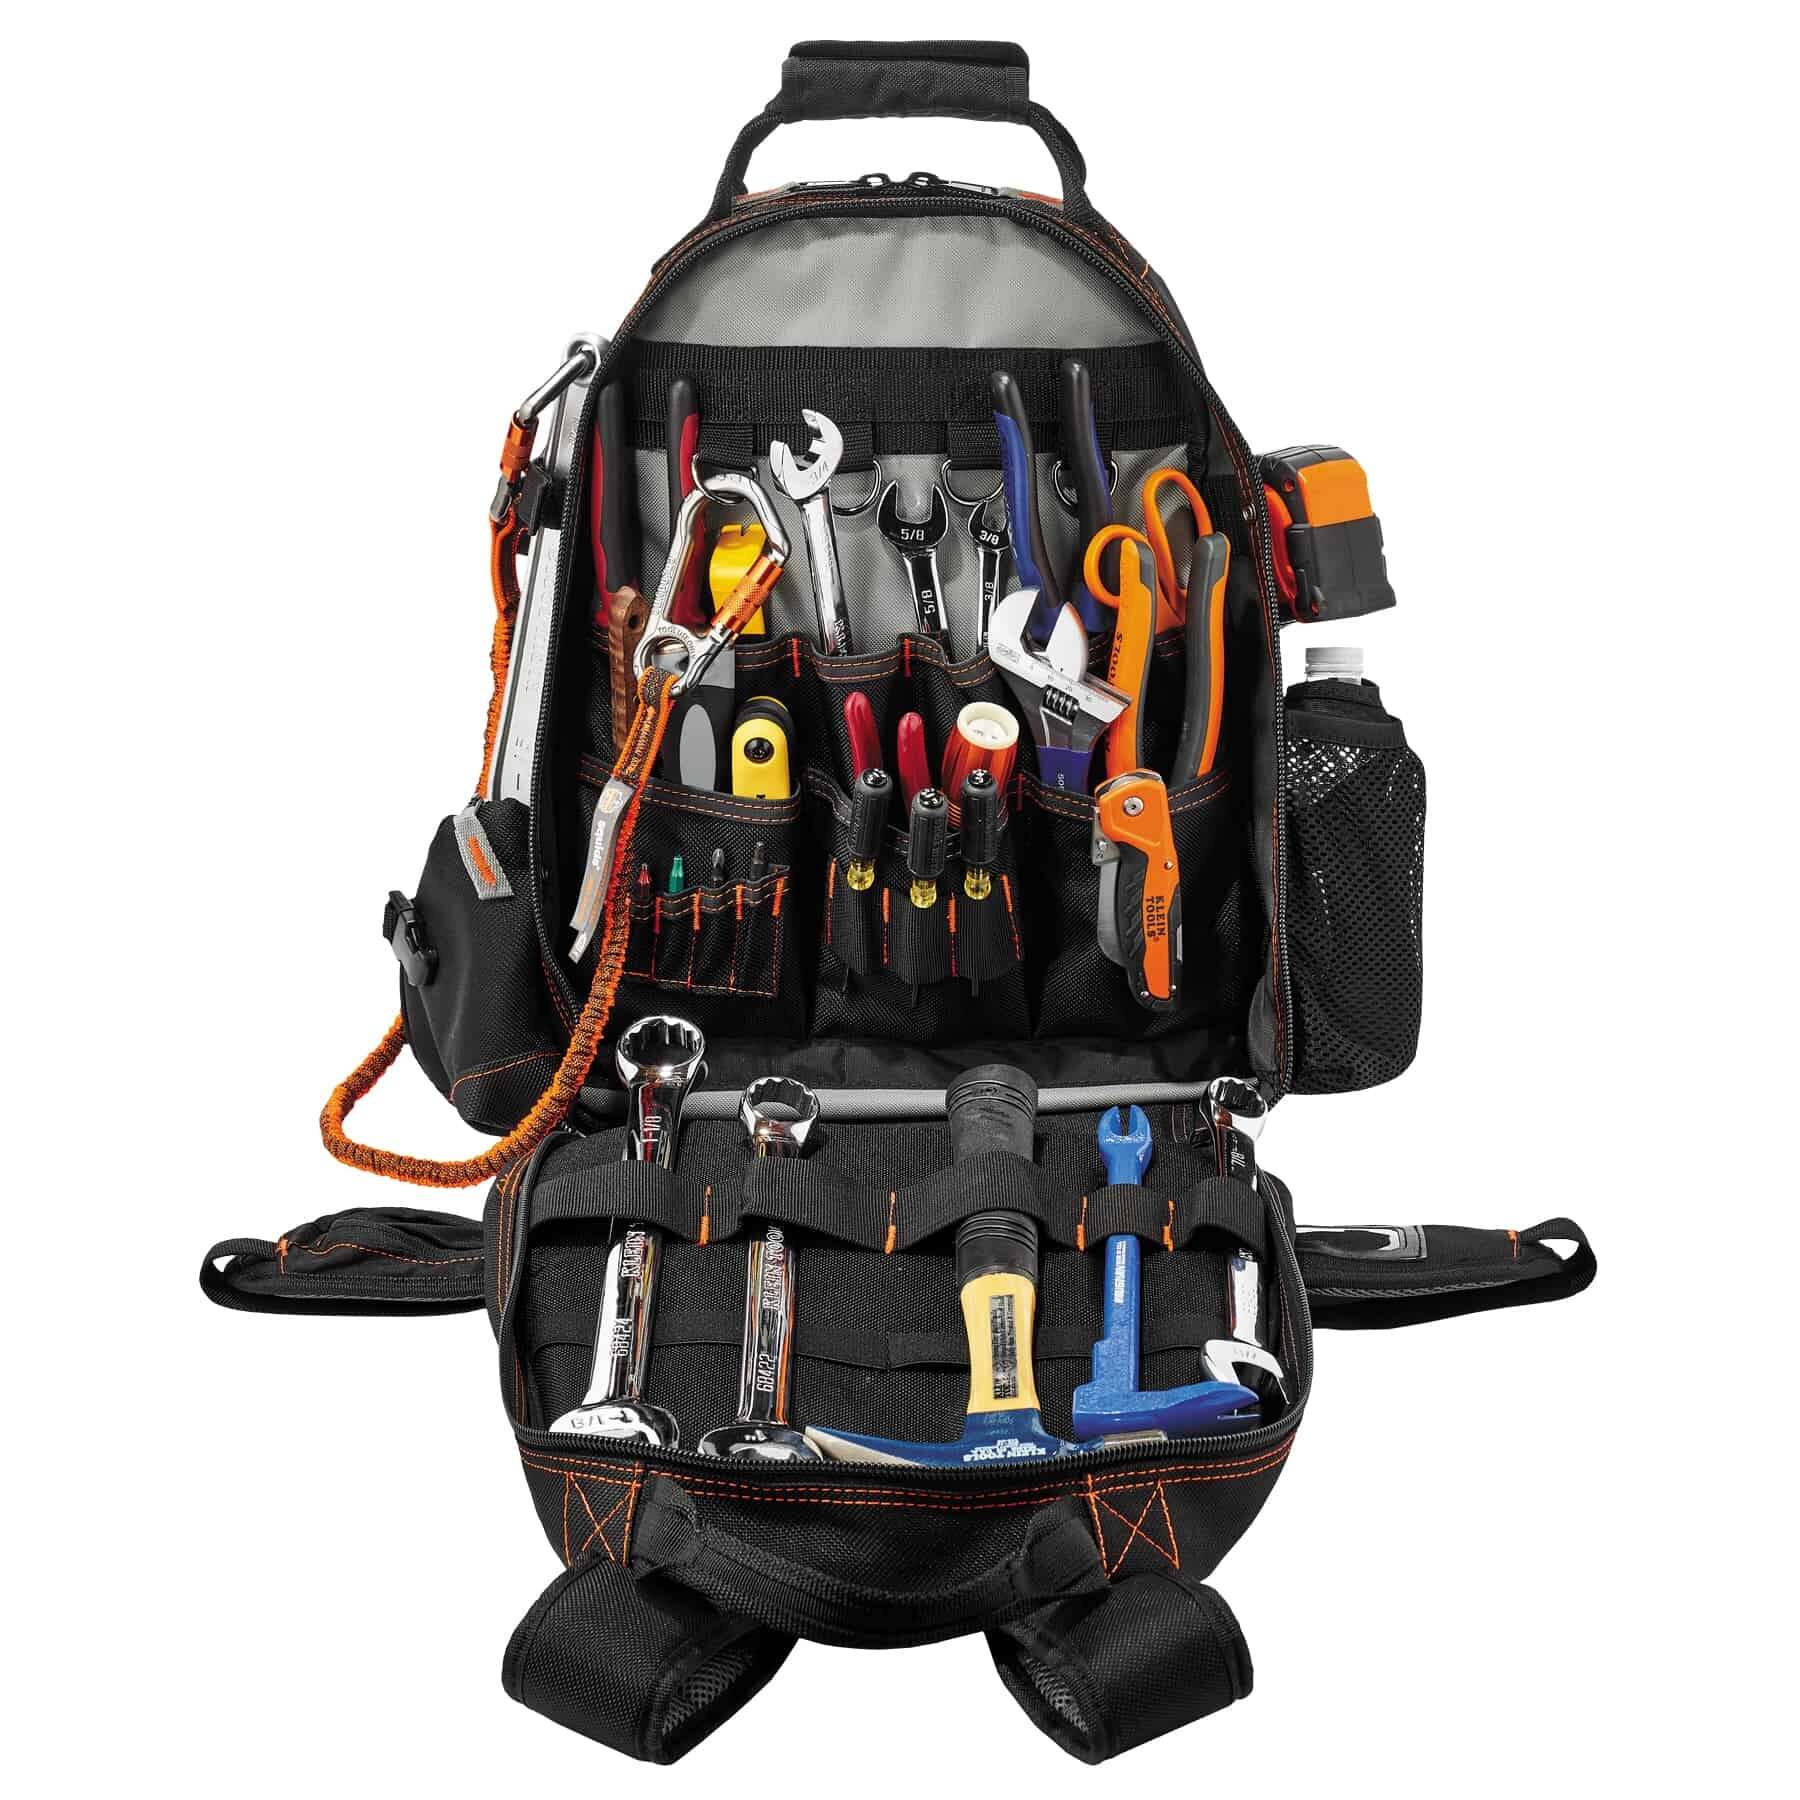 Tool Backpack for Carrying Tools Hands Free